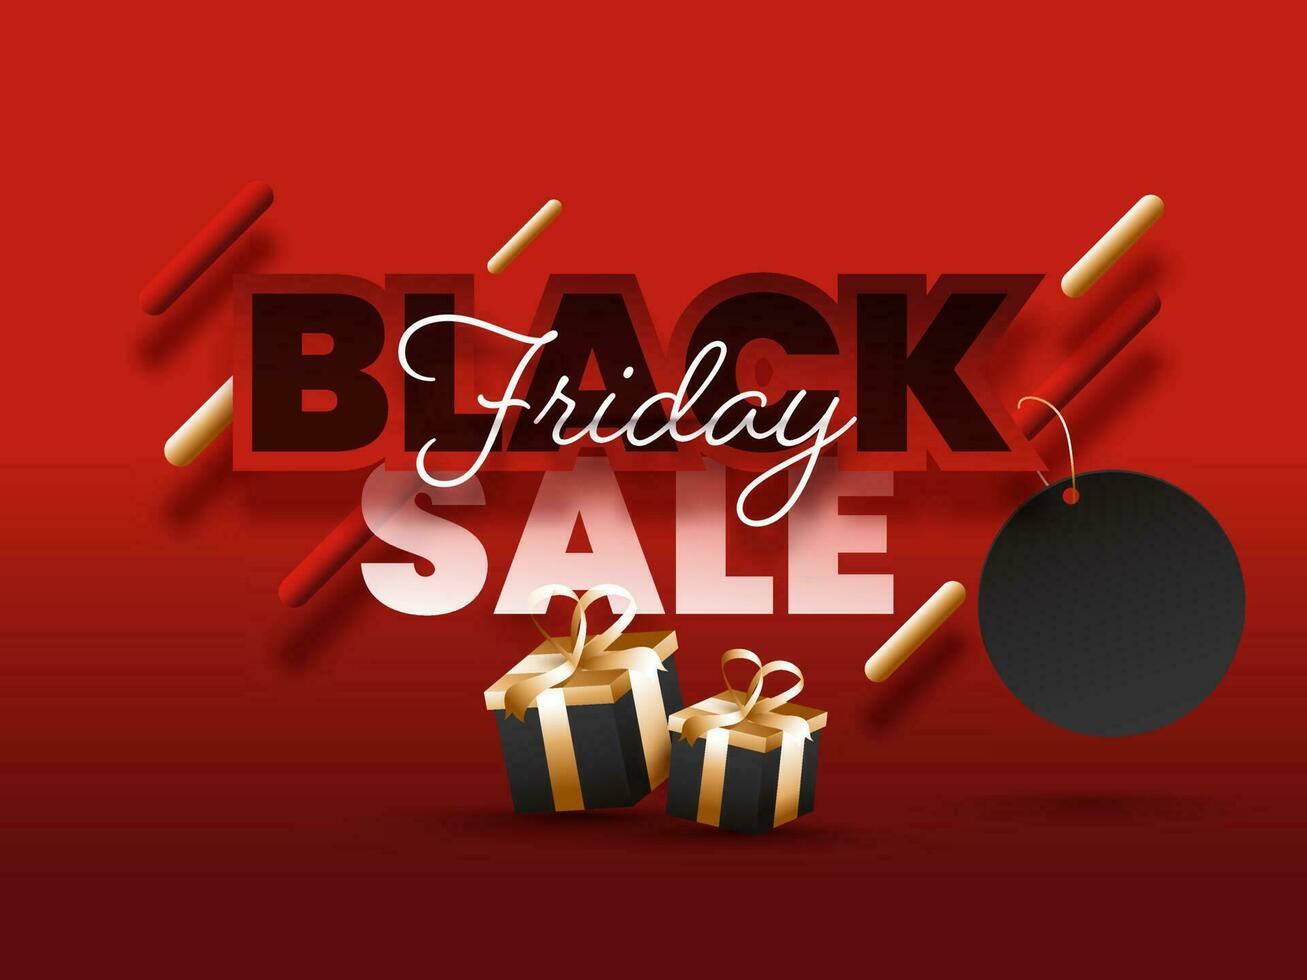 Black Friday Sale Poster Design with Empty Label or Tag and Realistic Gift Boxes on Red Background. vector